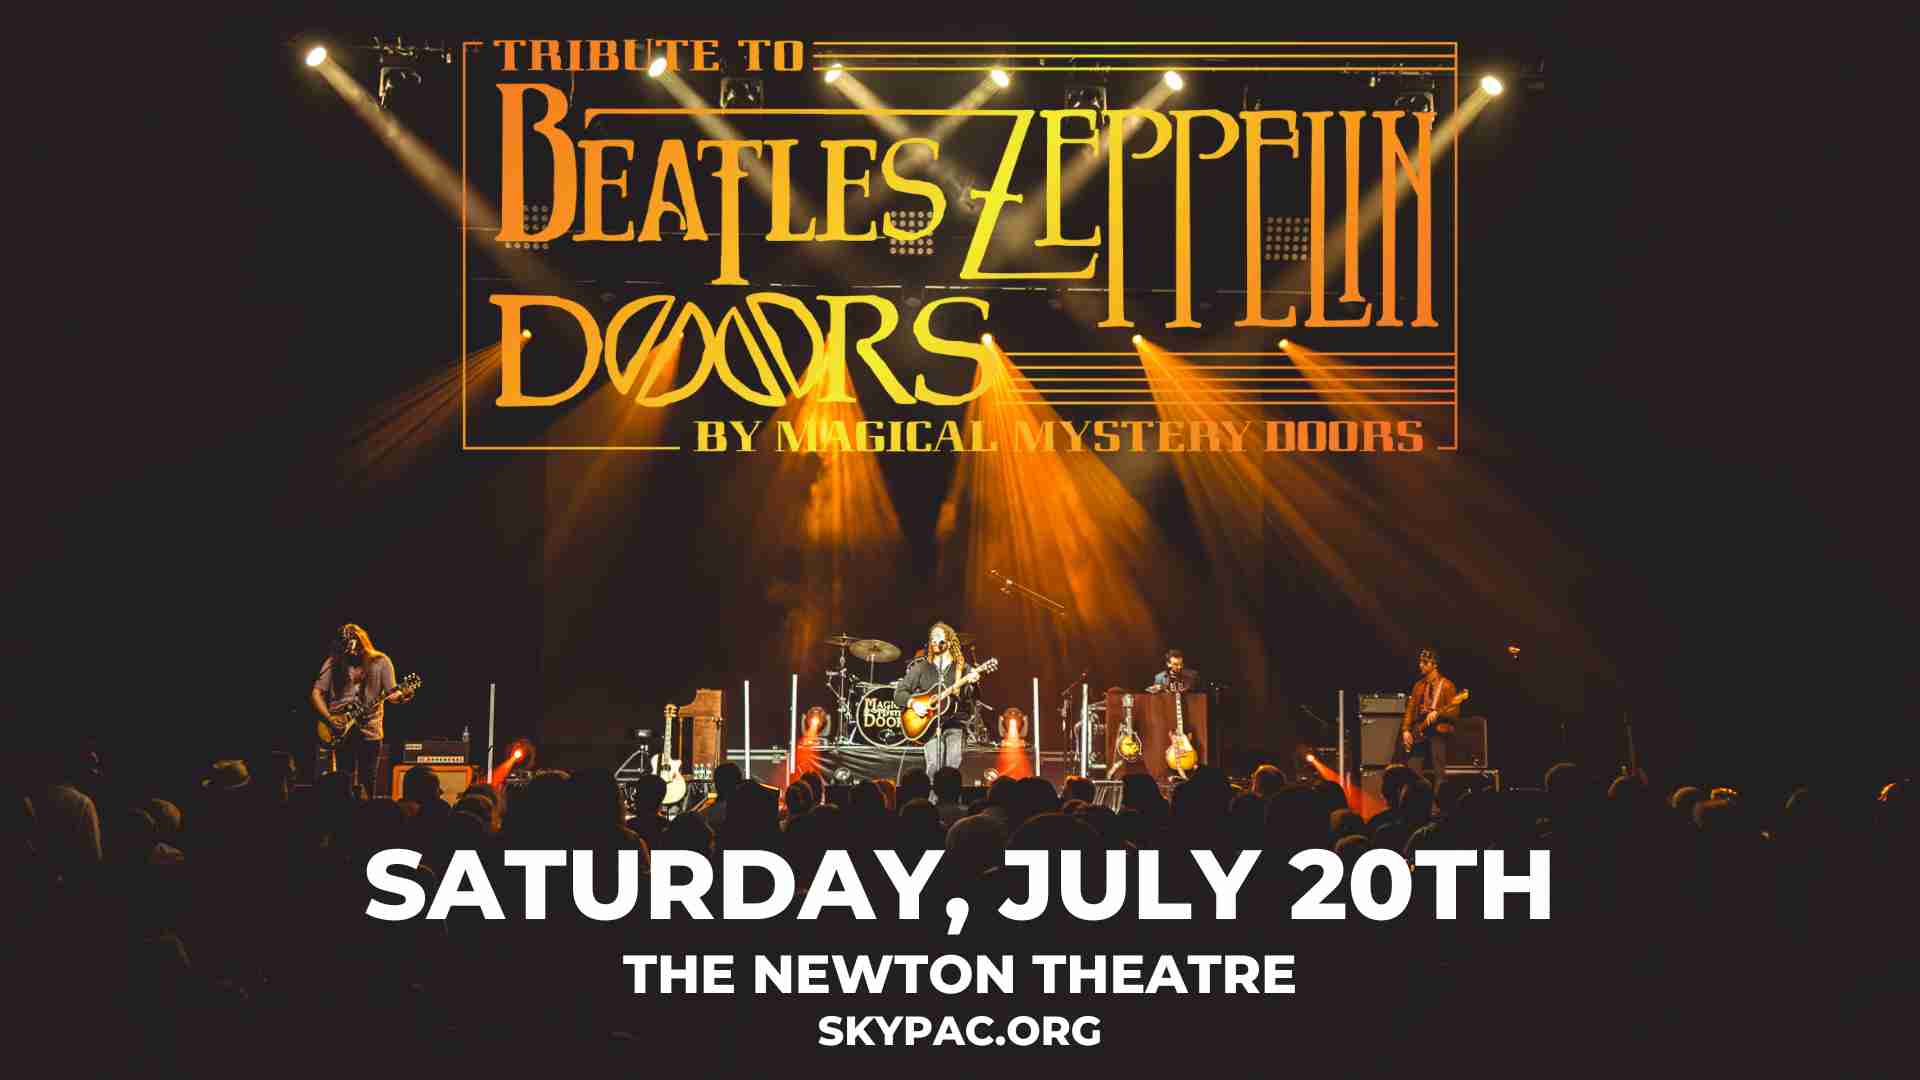 Magical Mystery Doors comes to The Newton Theatre on Saturday, July 30th.